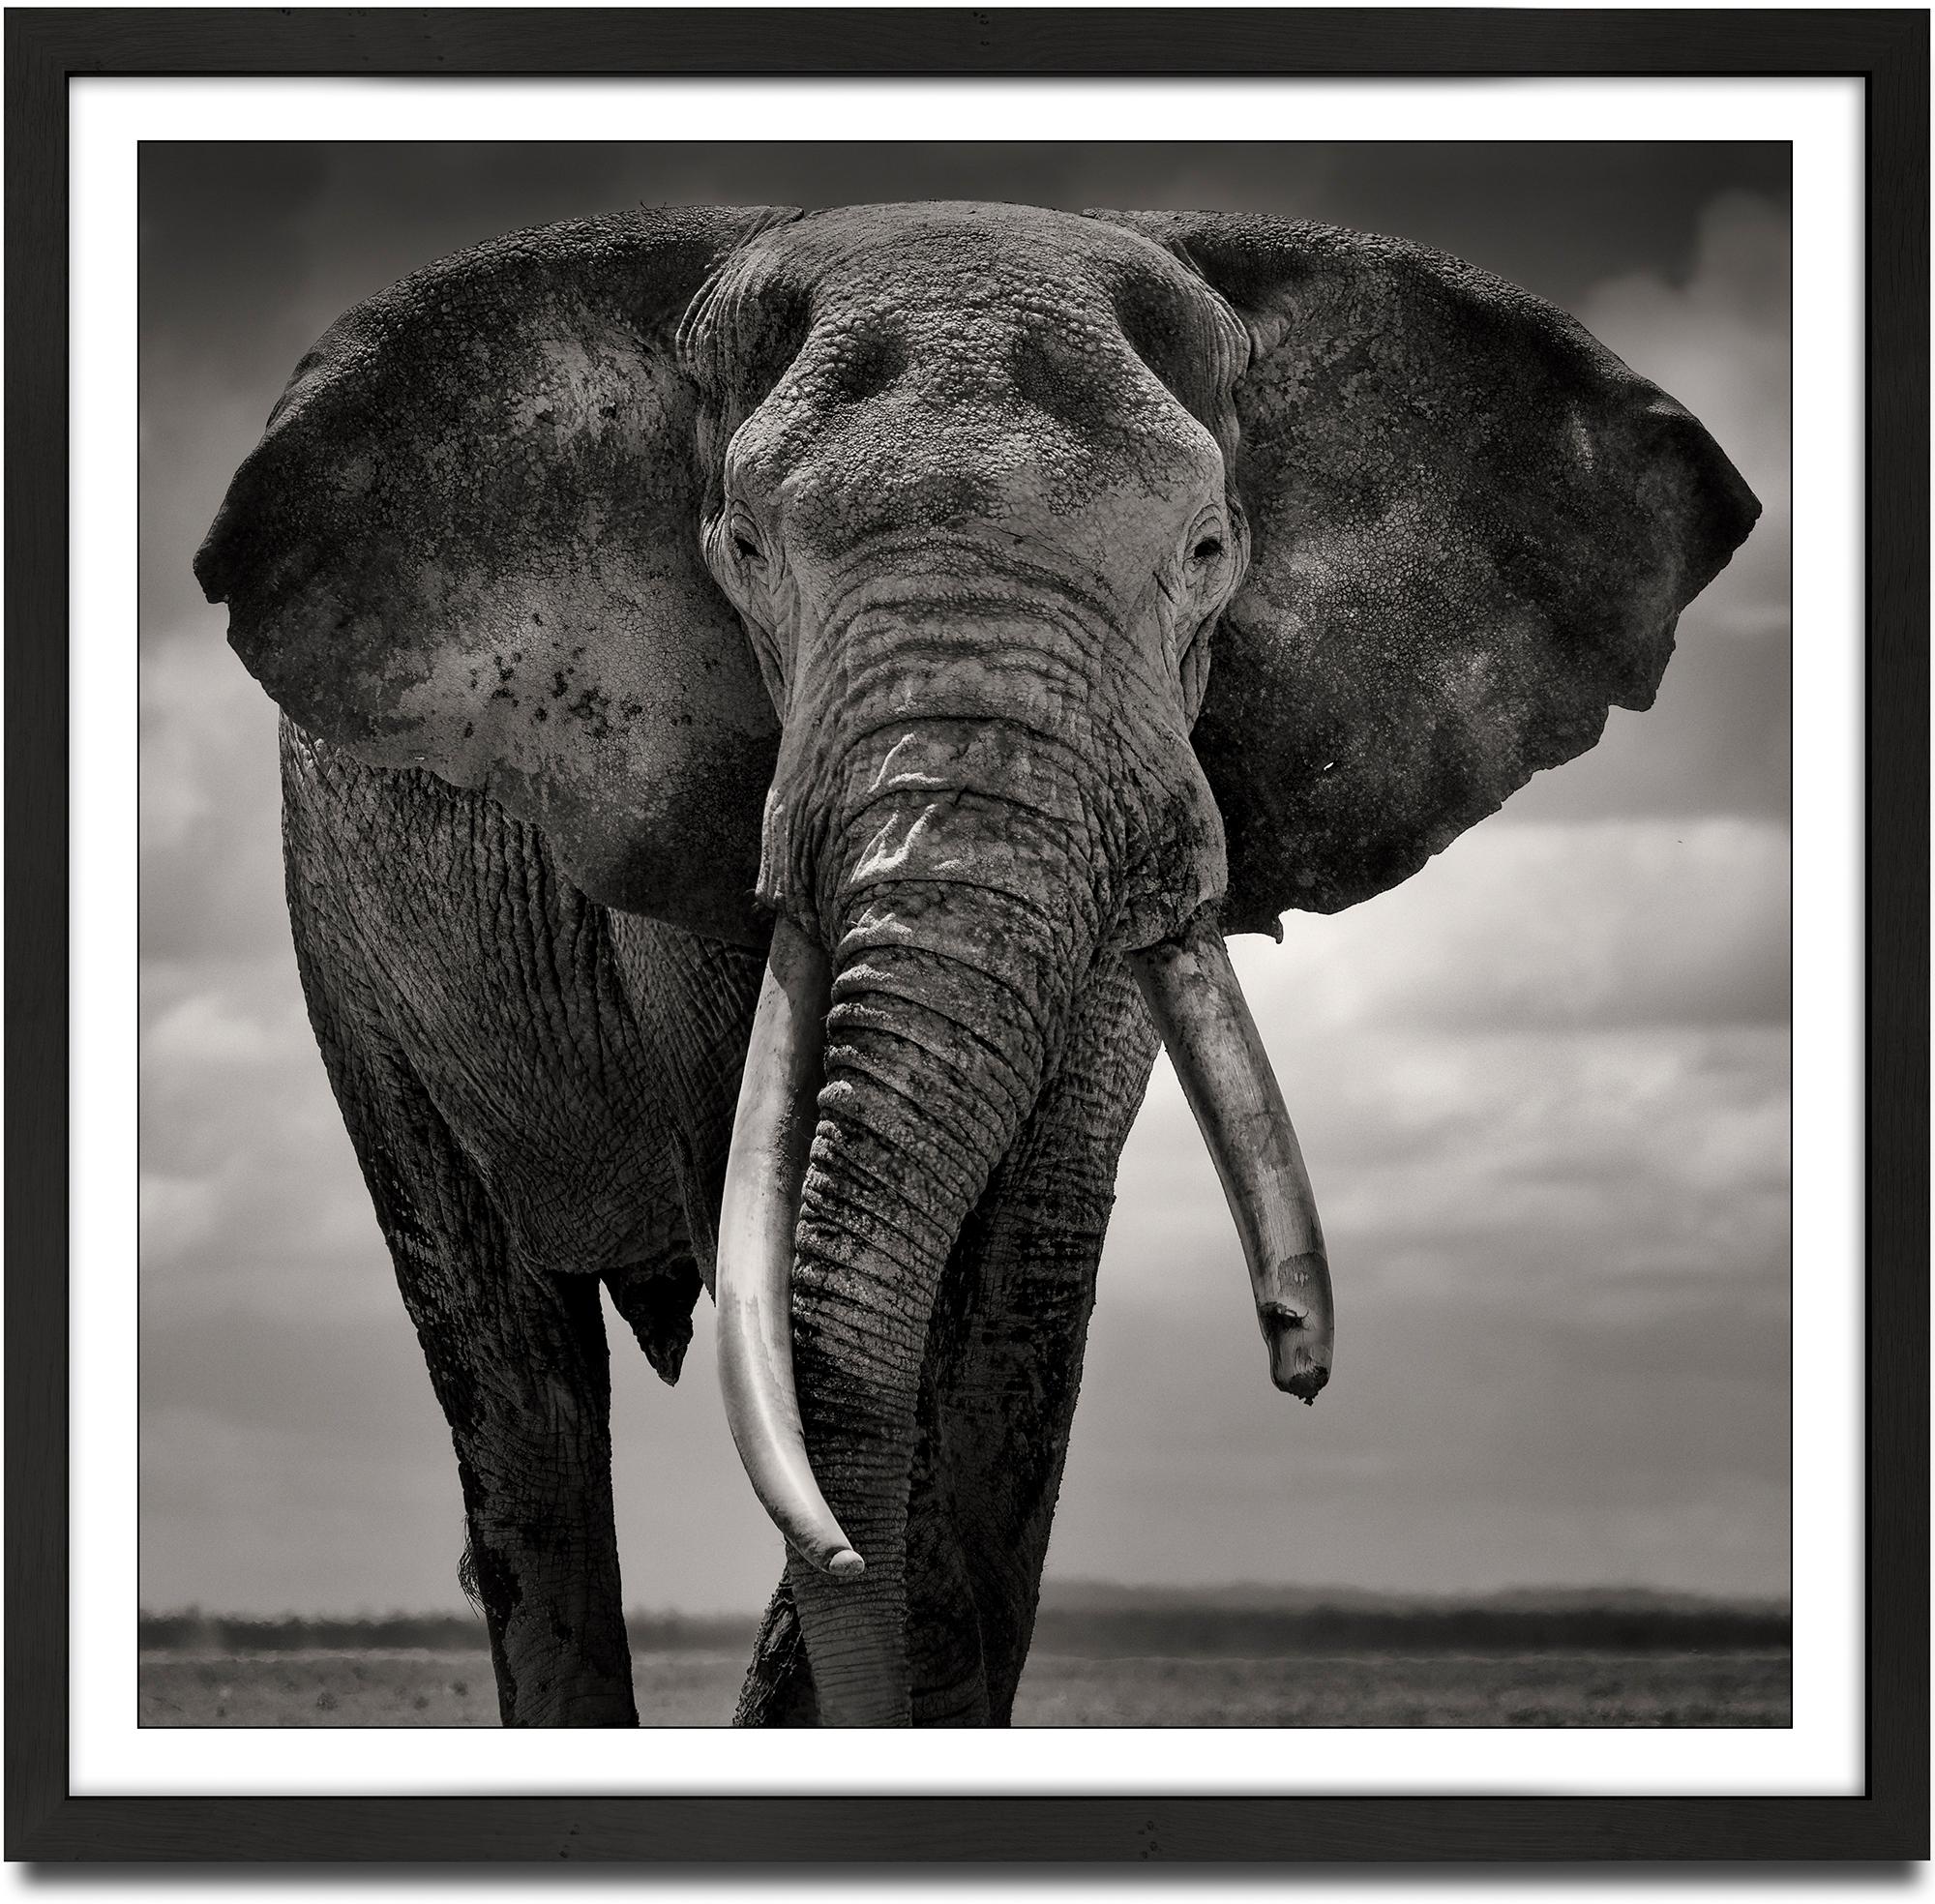 Portrait of Primo II, animal, wildlife, black and white photography, elephant - Photograph by Joachim Schmeisser